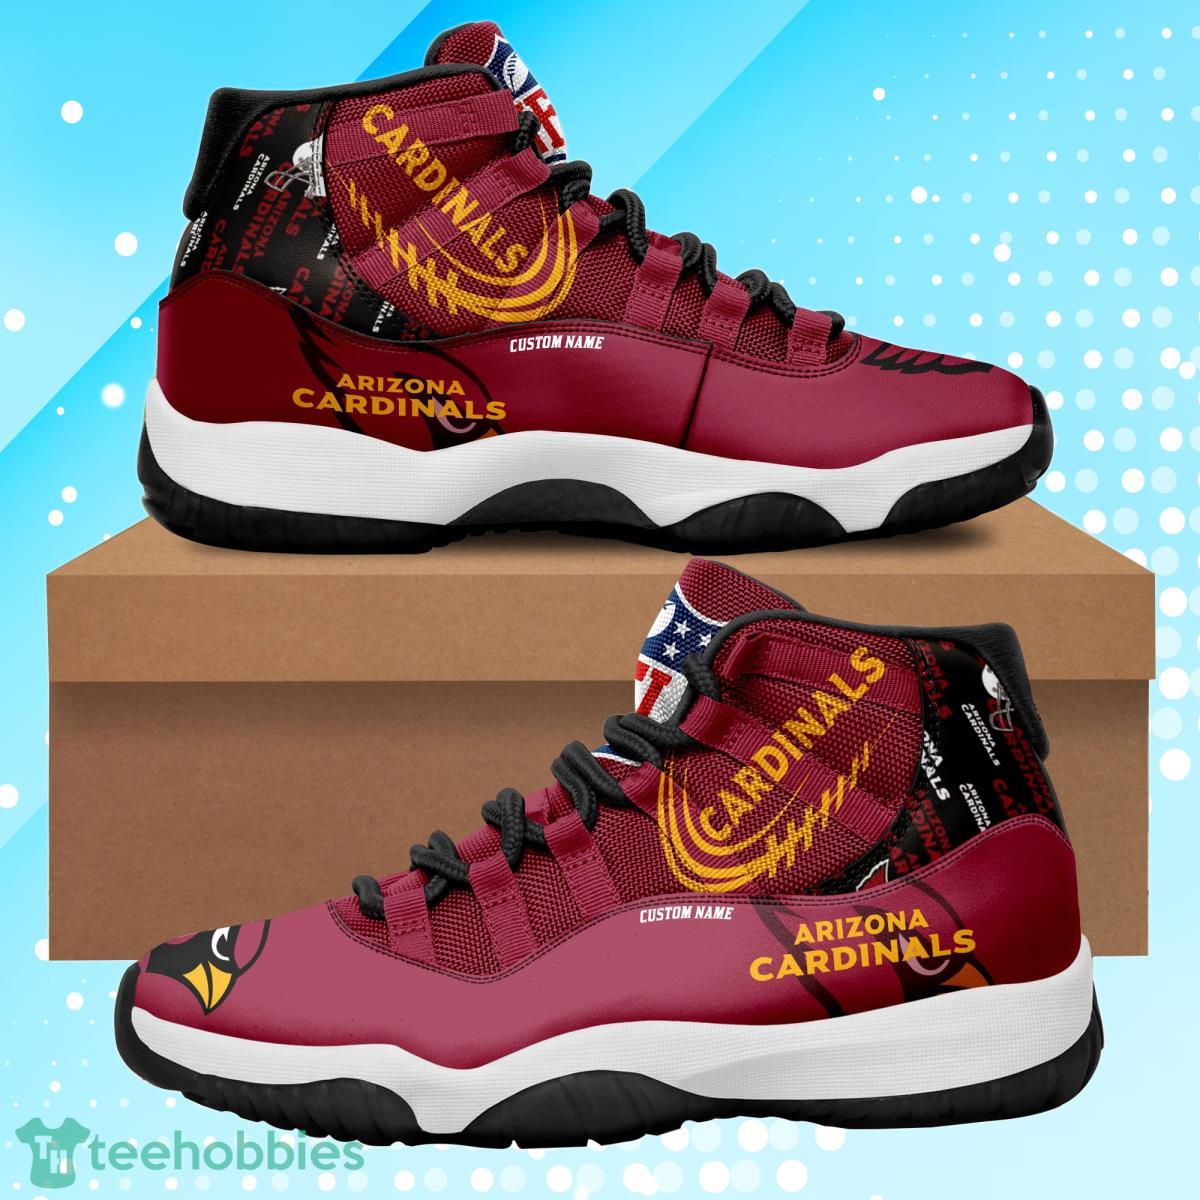 Arizona Cardinals Personalized Air Jordan 11 Gift For Fans Product Photo 1